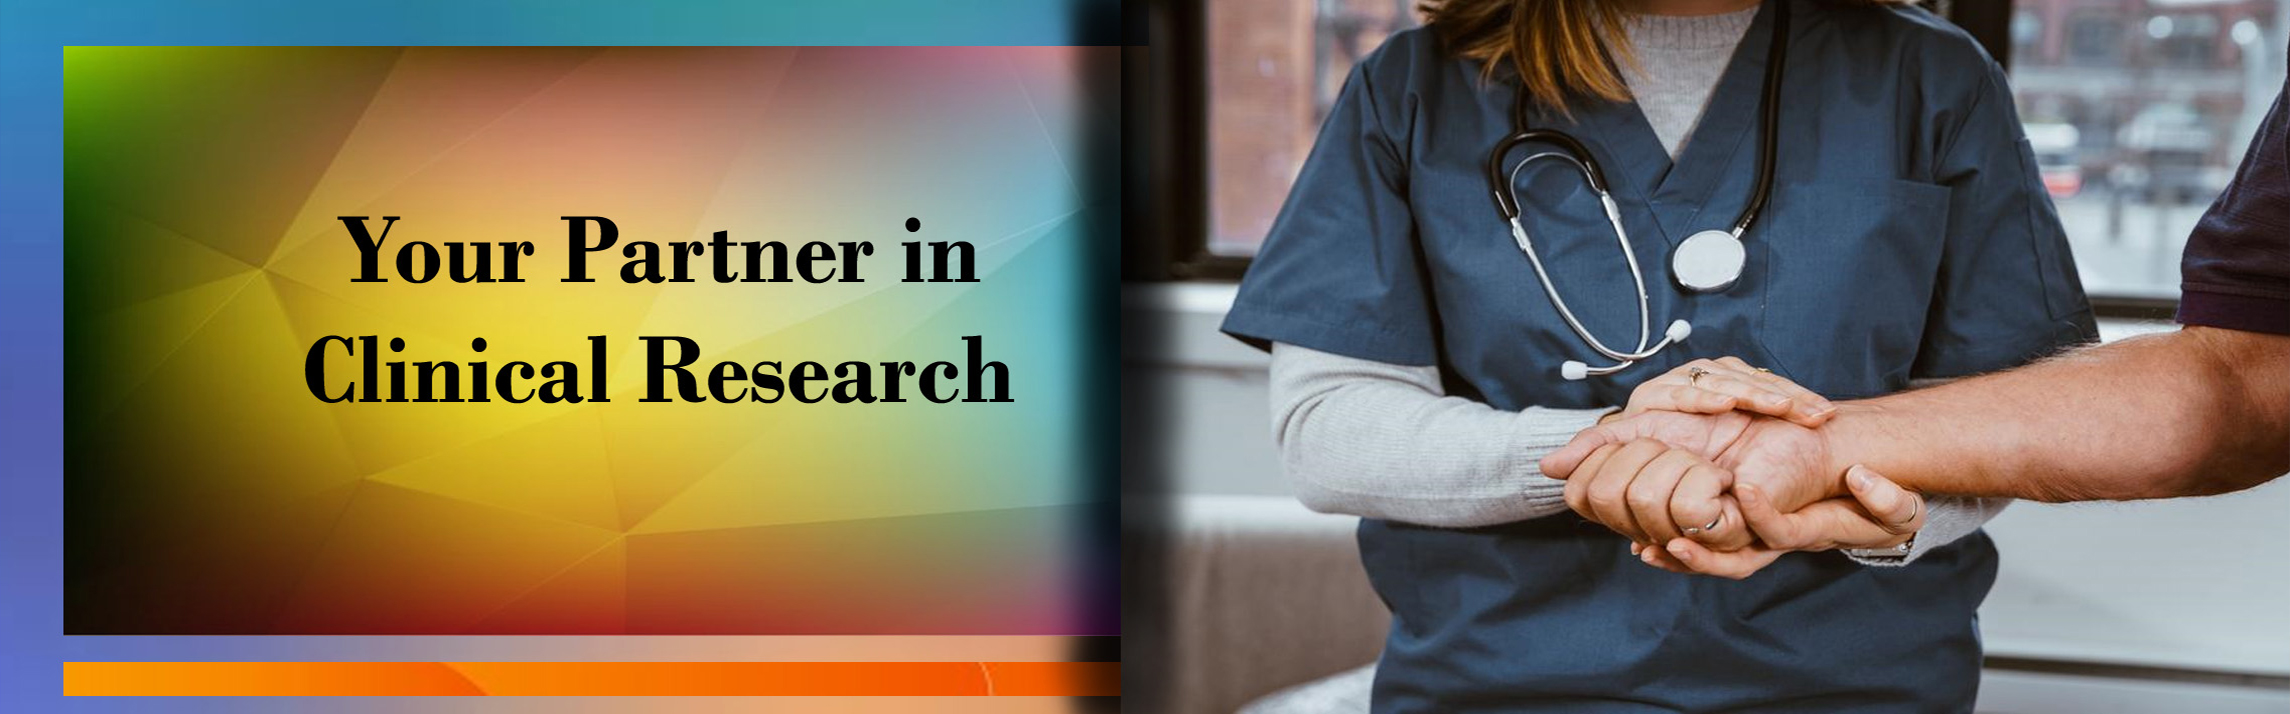 Your partner in Clinical Research